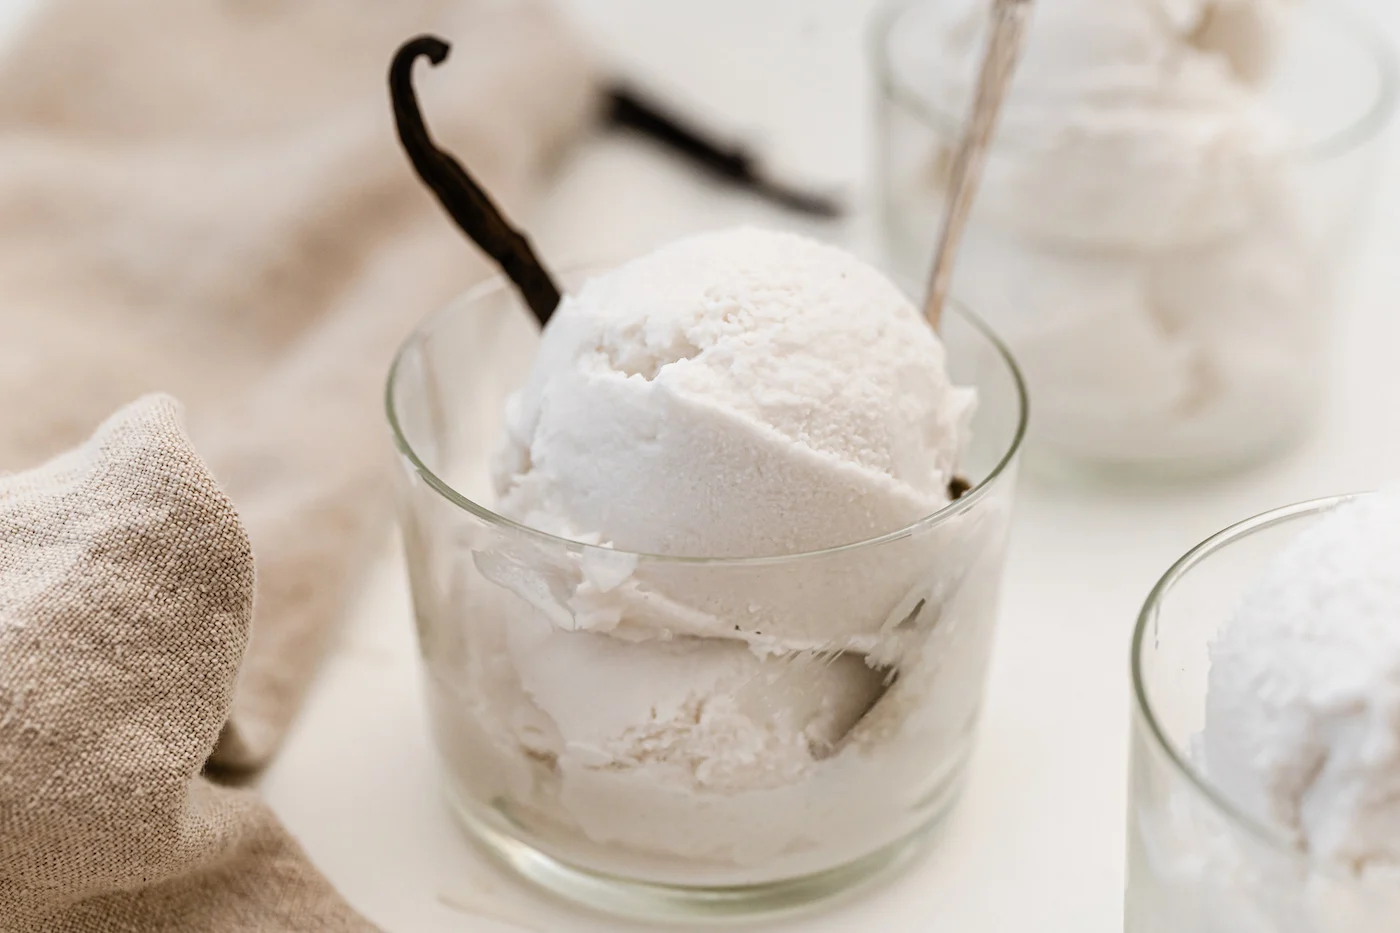 How To Make Homemade Ice Cream Using Coconut Milk Without Ice Cream Maker